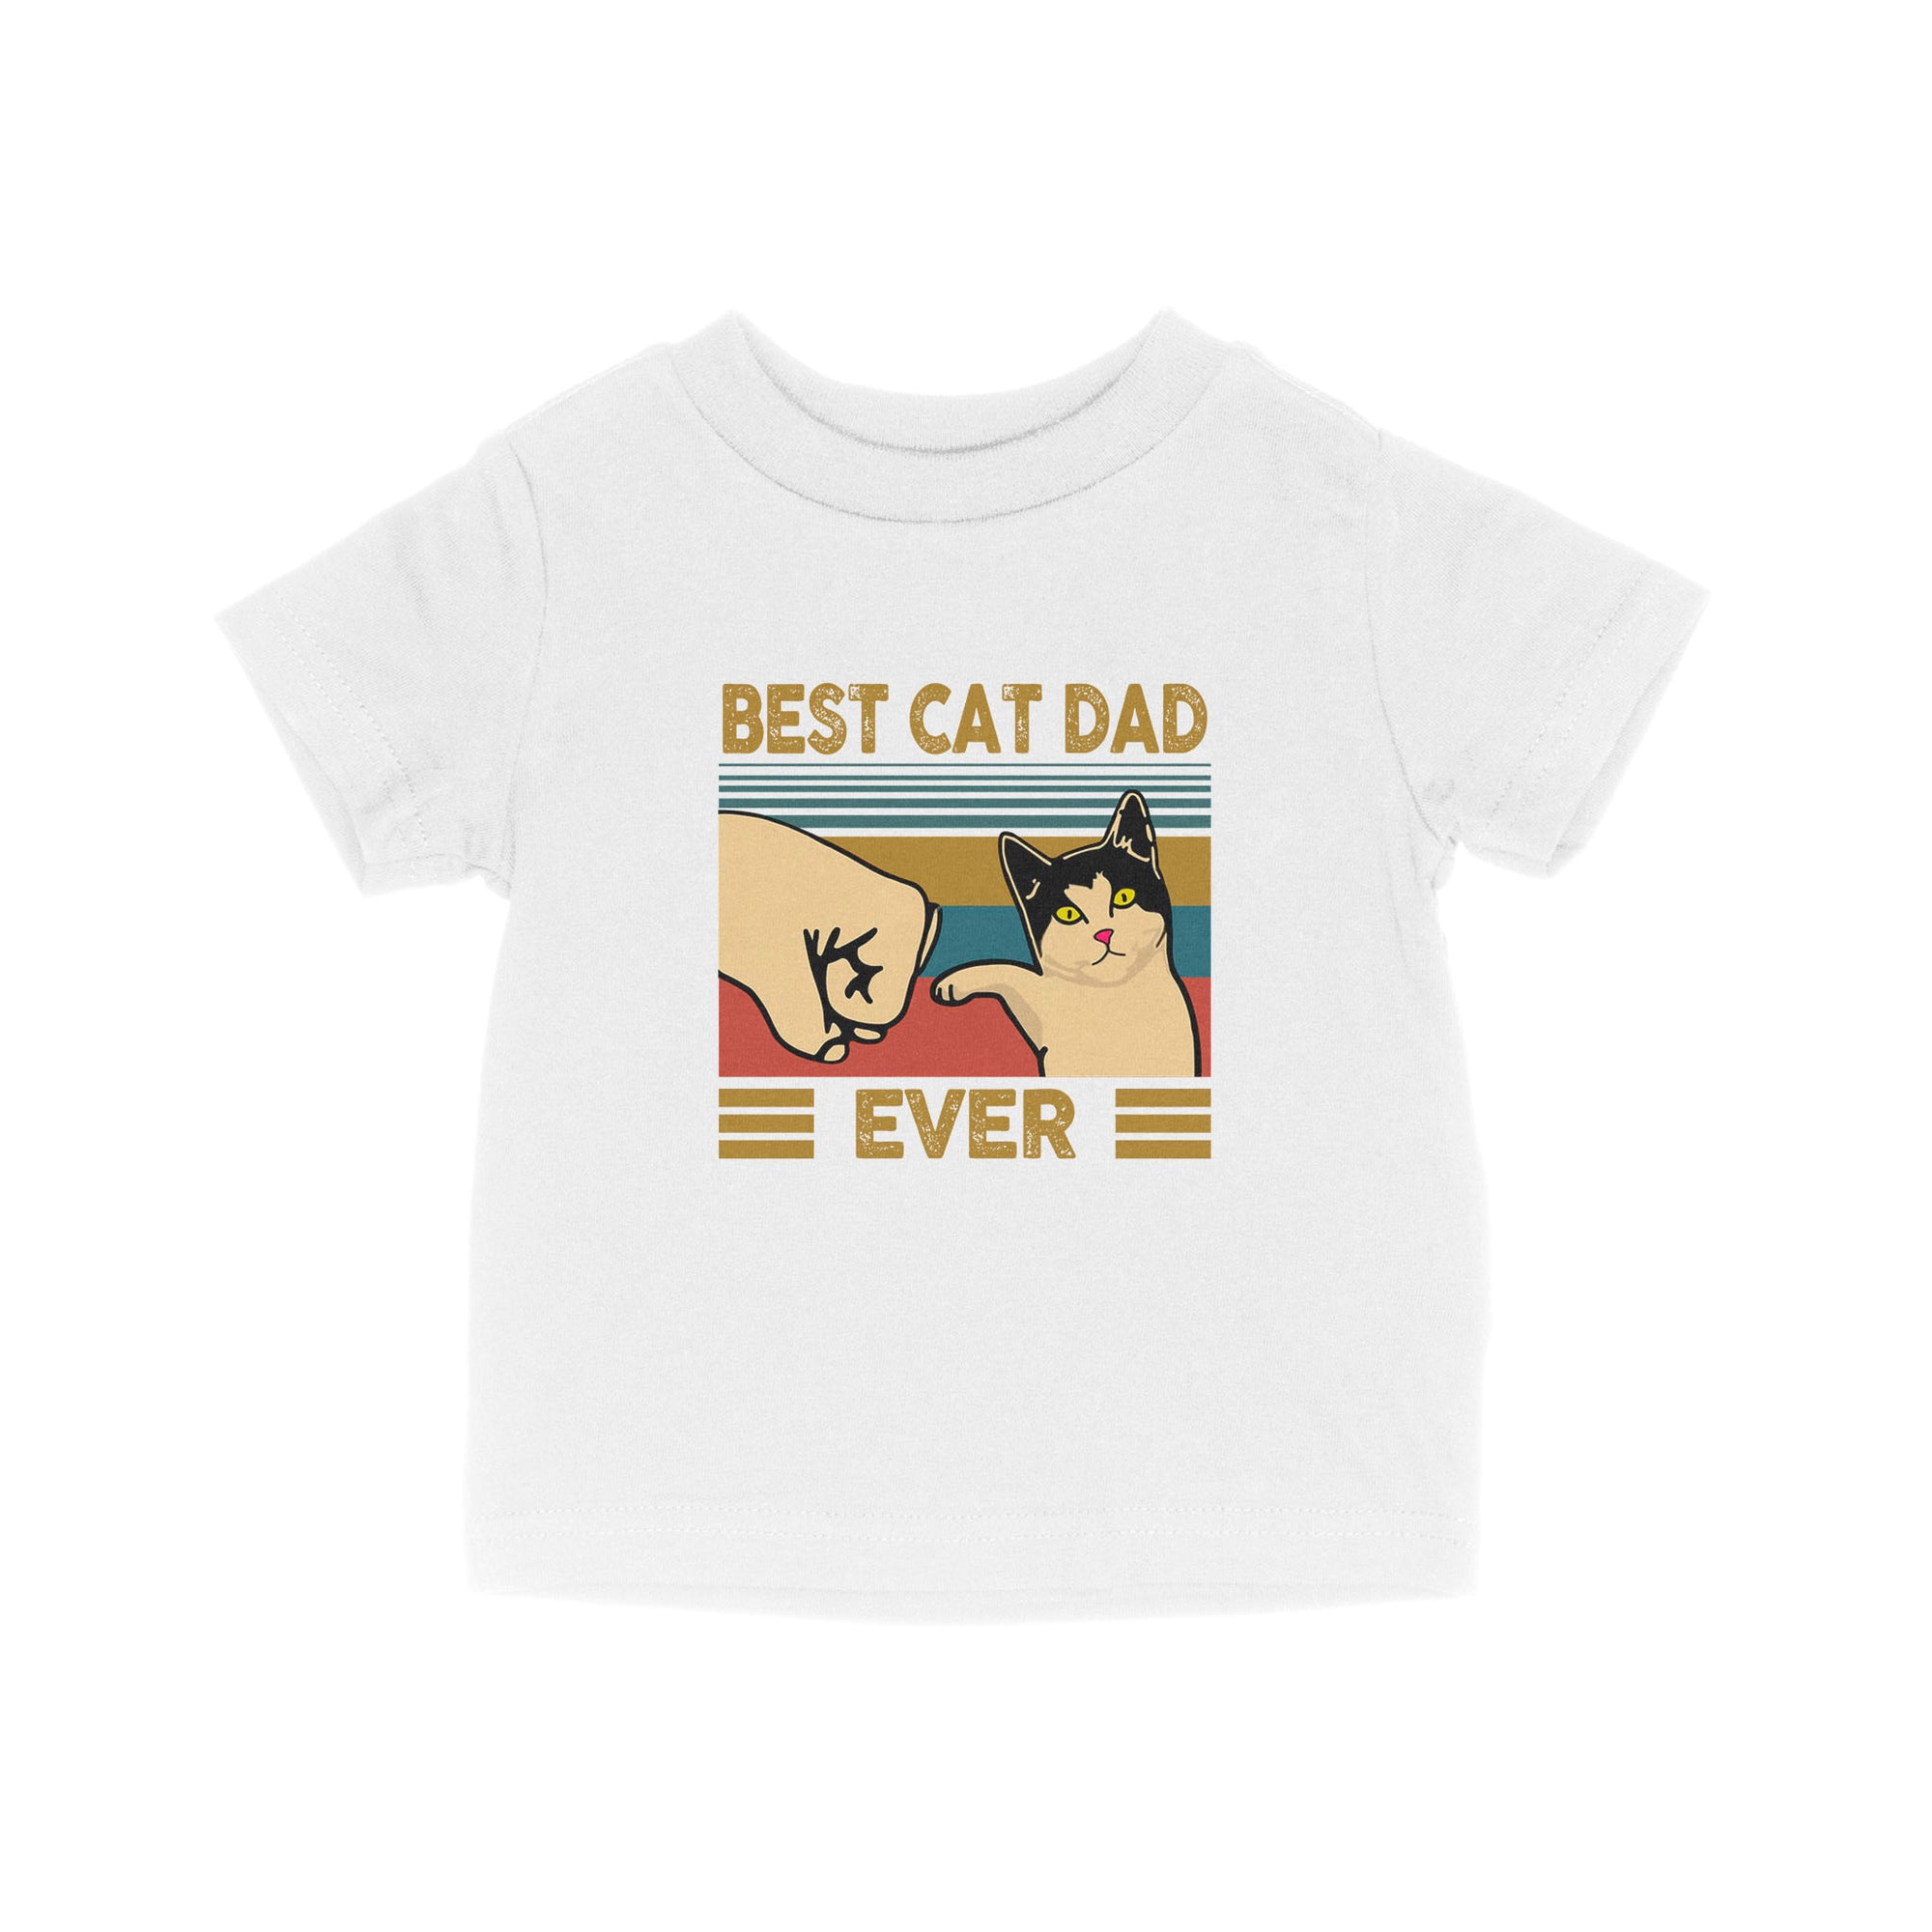 Best Cat Dad Ever - Baby T-Shirt